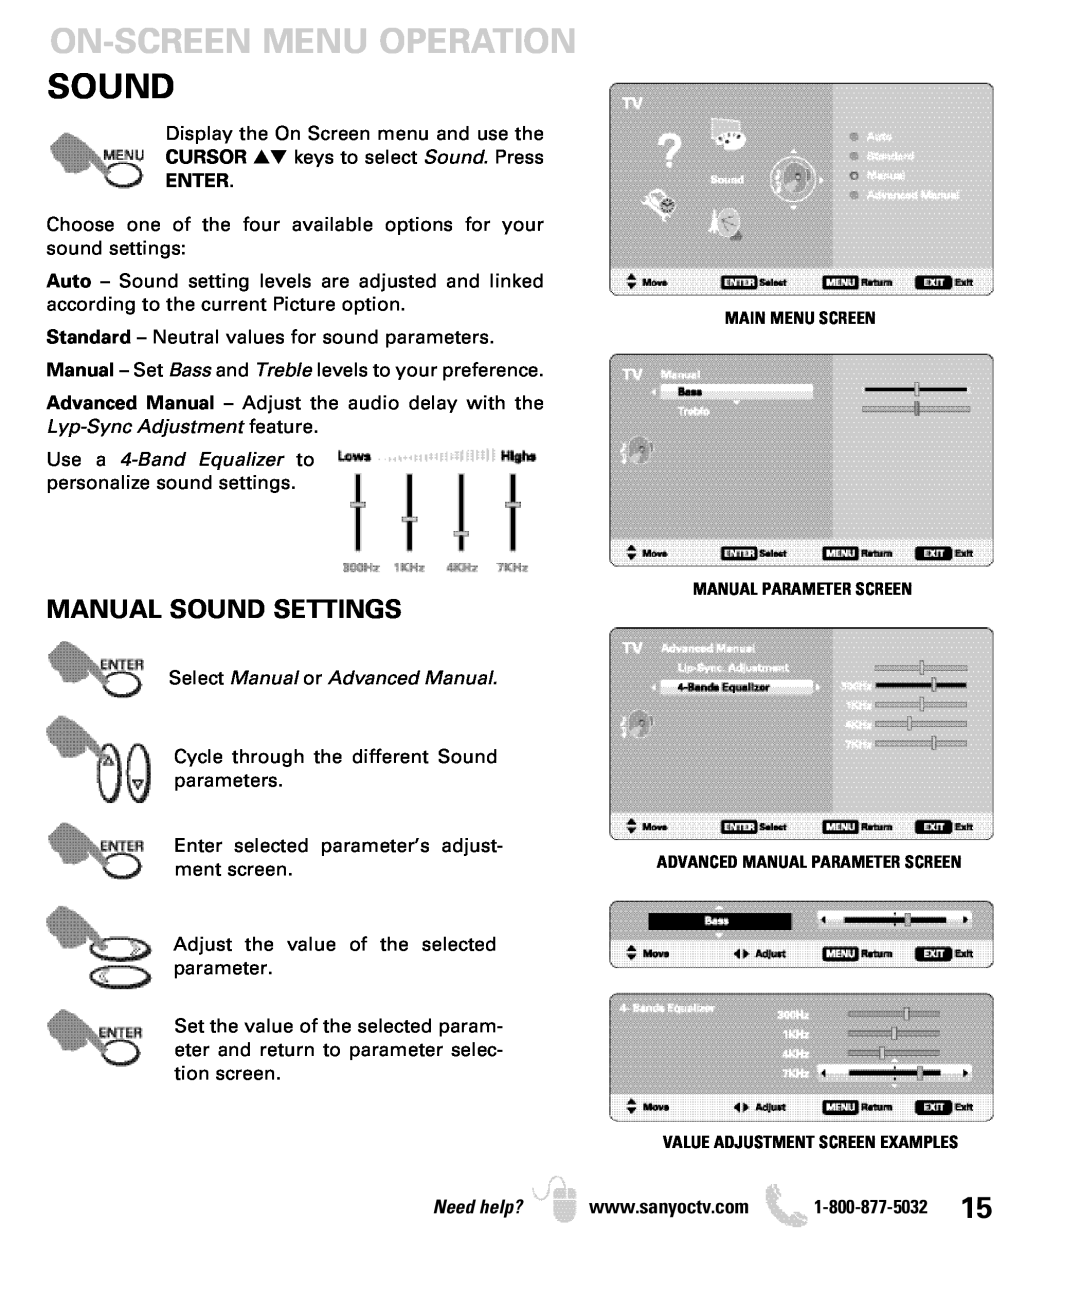 Sanyo DP19649 On-Screen Menu Operation Sound, Manual Sound Settings, Use a 4-Band Equalizer to personalize sound settings 